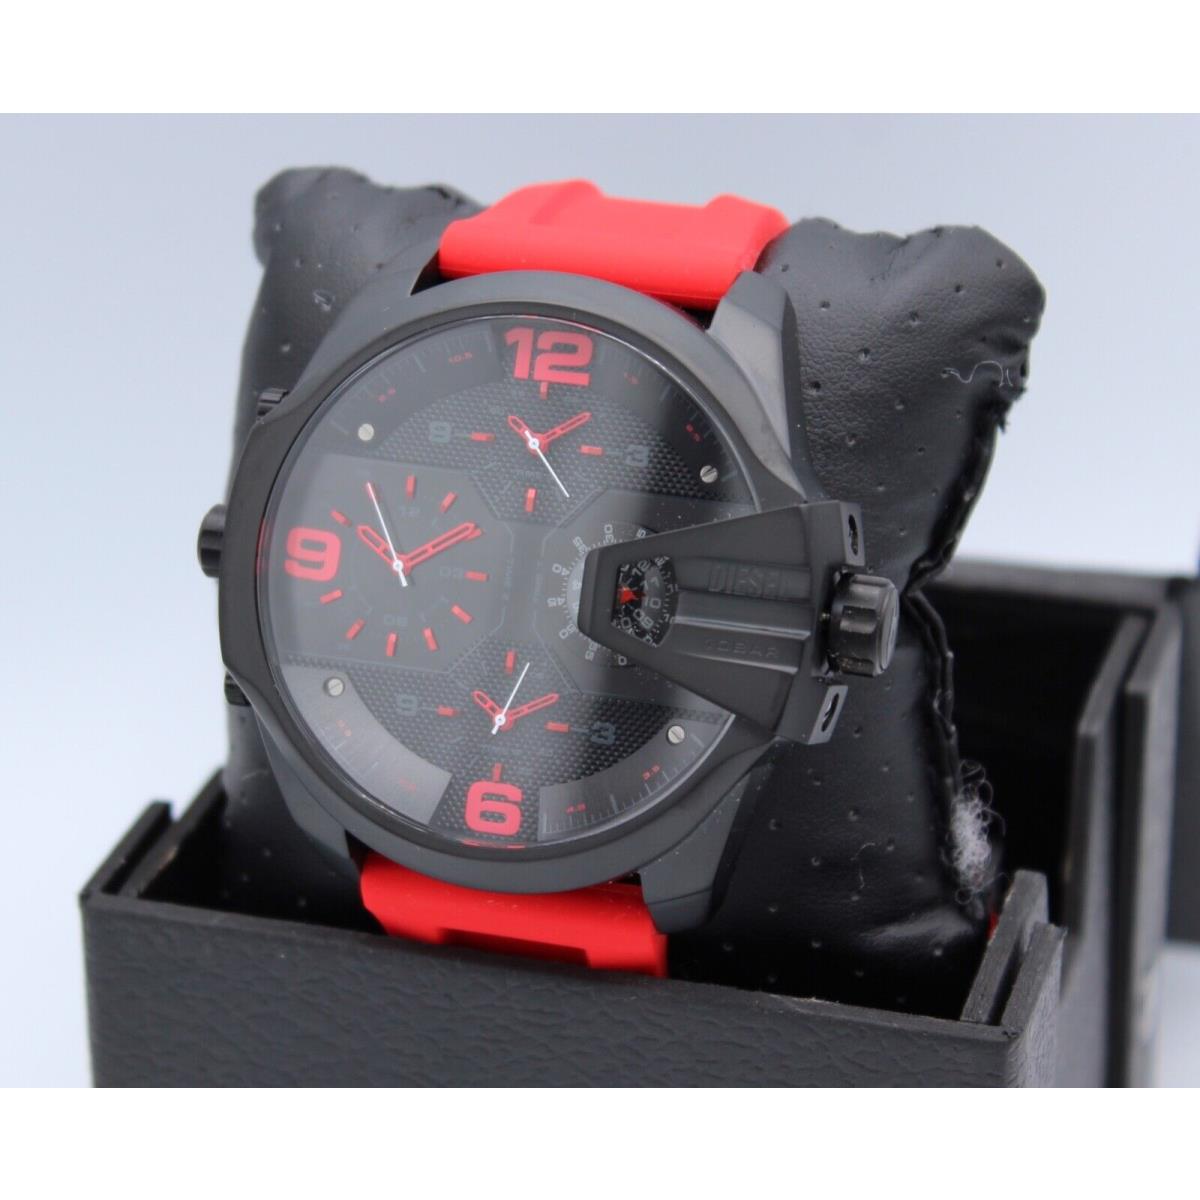 Diesel watch Uber Chief - Black Dial, Red Band, Red Bezel